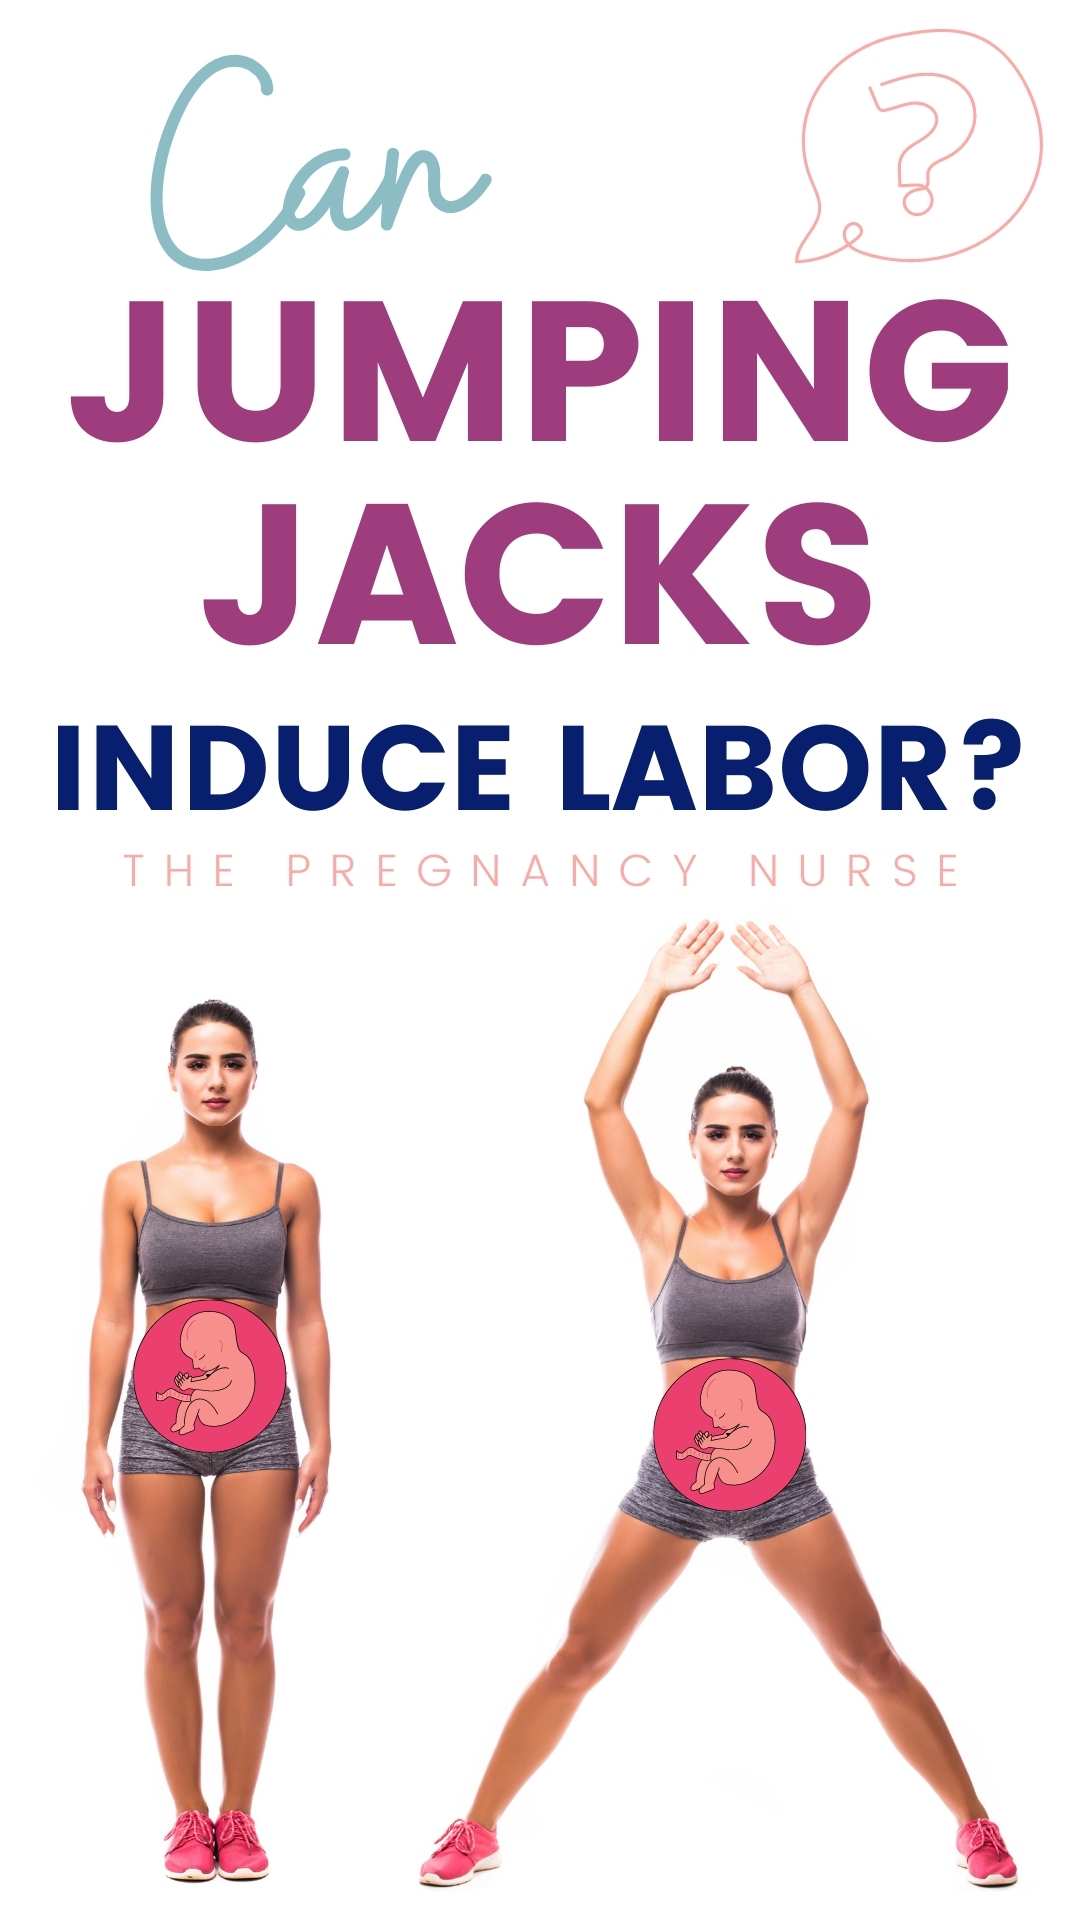 Do you want to know the truth about jumping jacks and pregnancy? Here's what you need to know. Pregnant women should avoid jumping exercises as they can cause early labor, bleeding, or even a miscarriage. Relaxin, a hormone released during pregnancy, makes pregnant women more prone to injury. So if you're looking for a safe prenatal class, look no further!